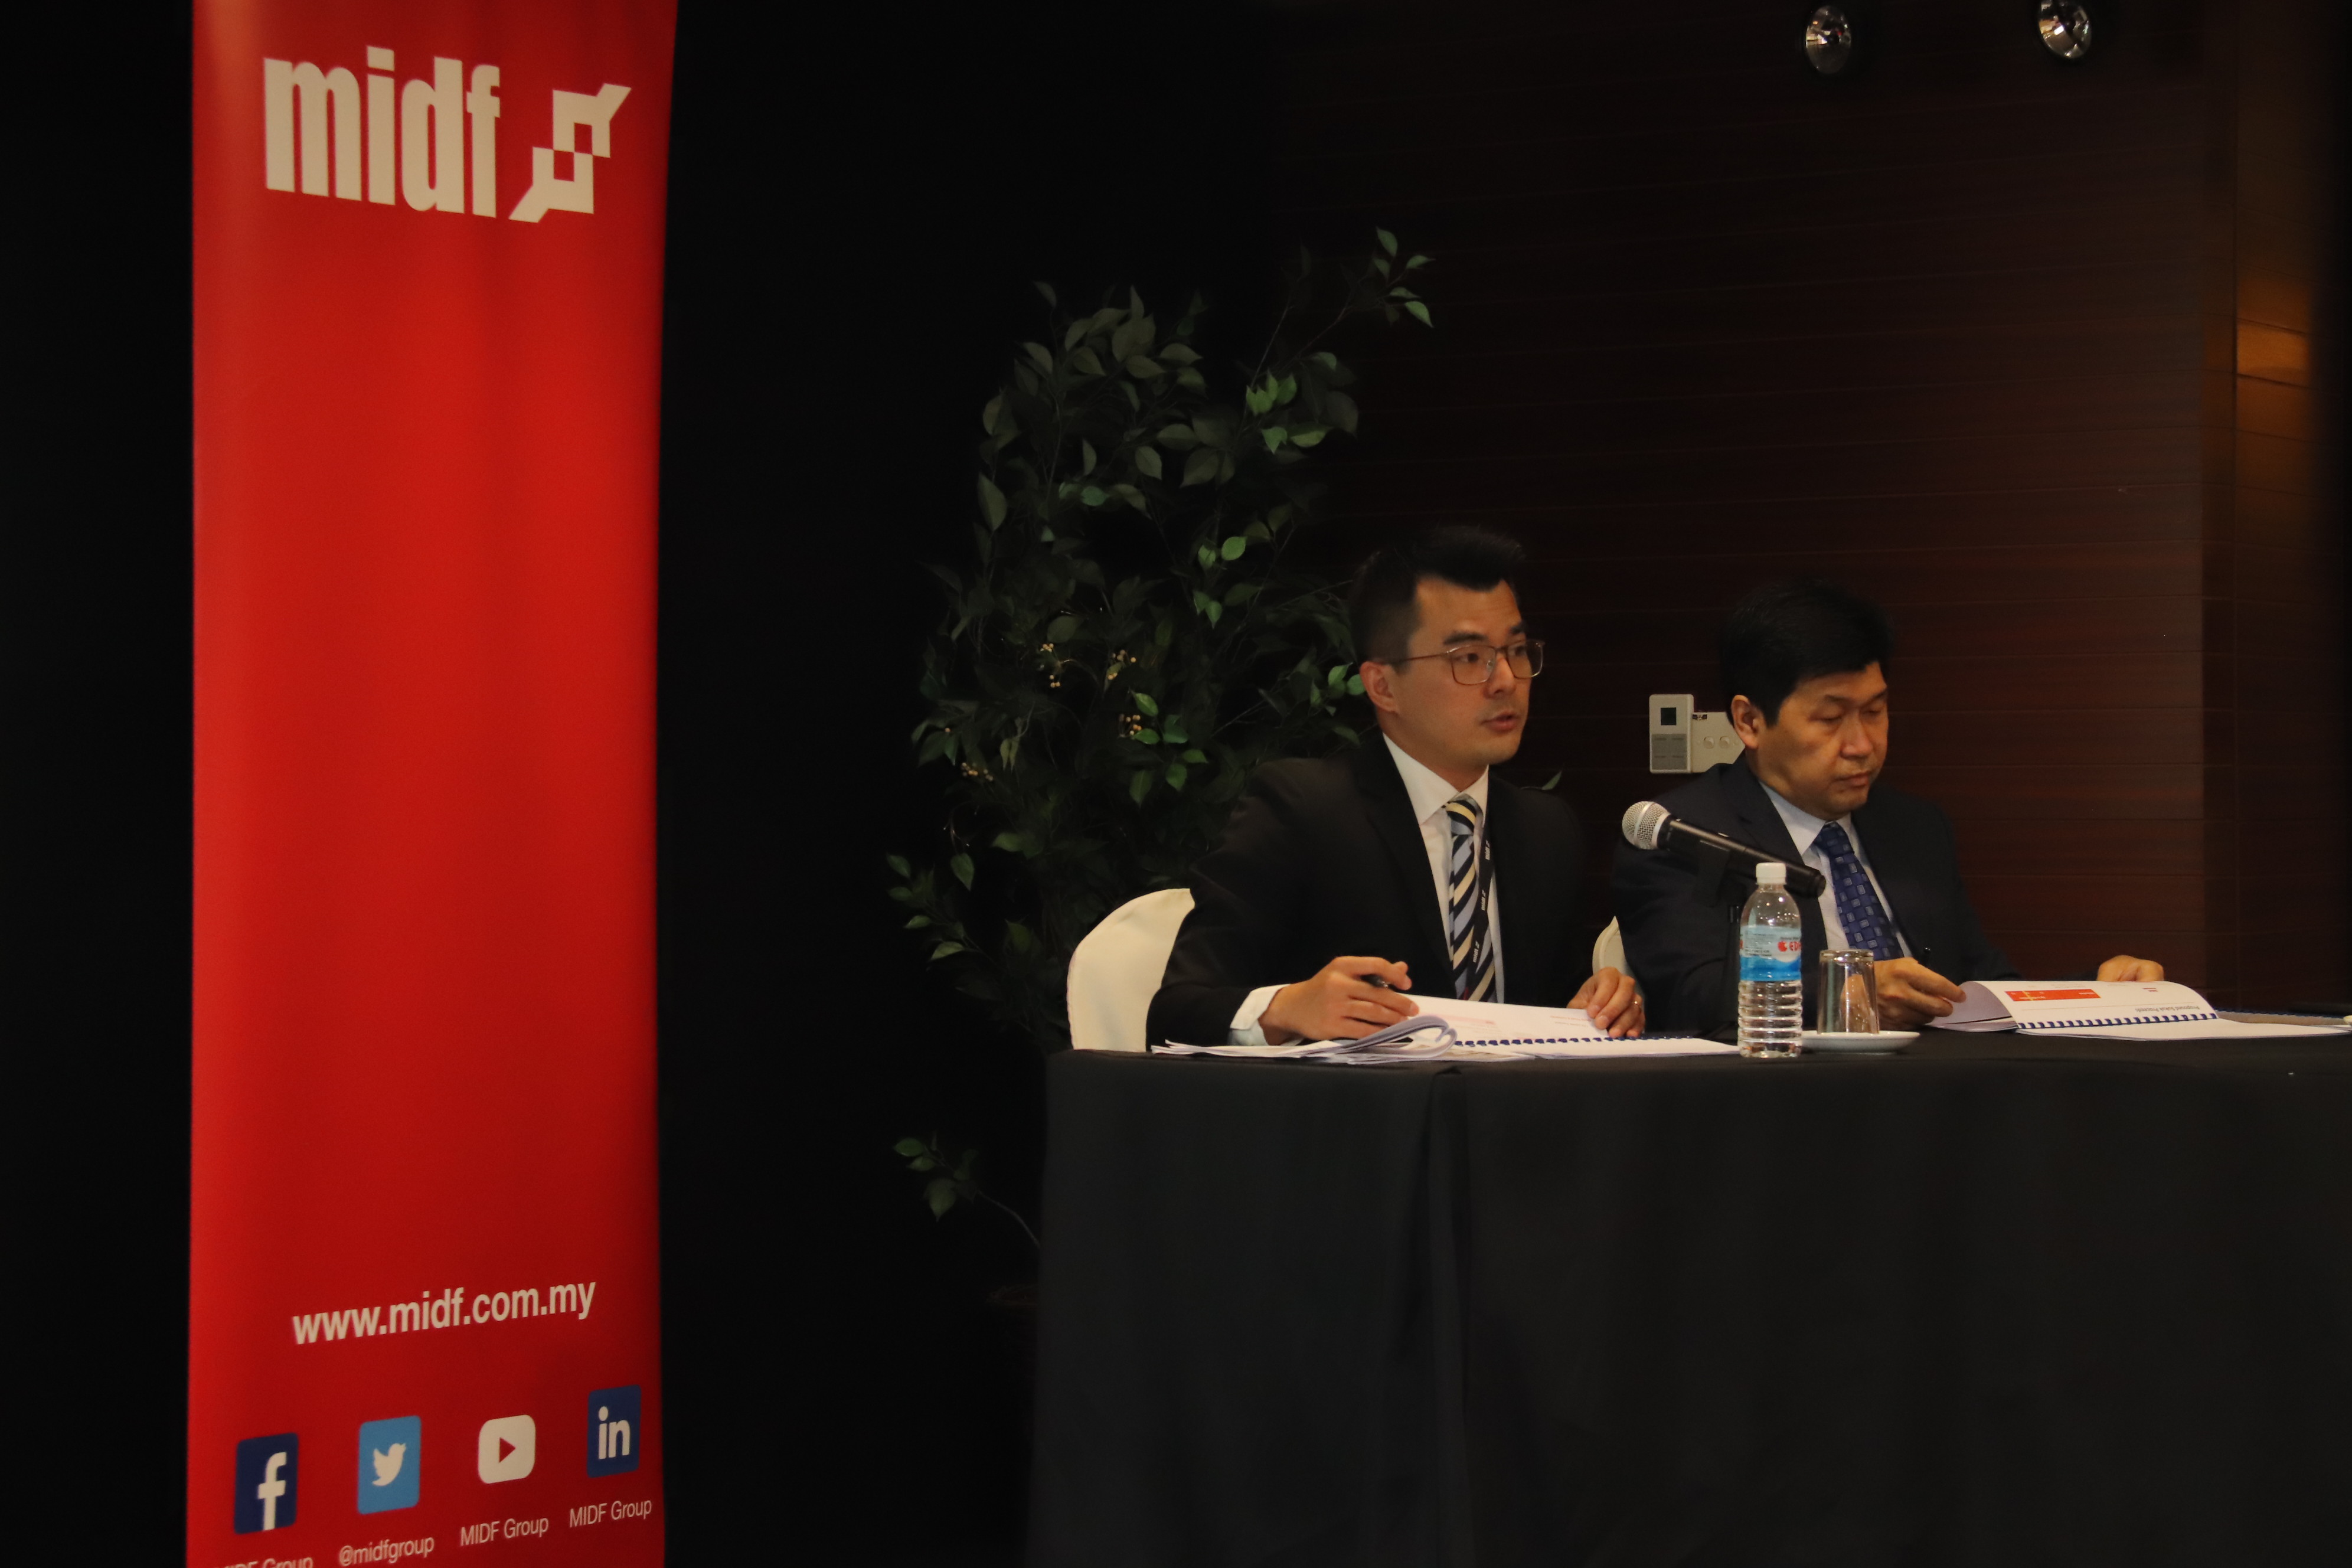 MIDF investor briefing for client’s proposed Sukuk programme